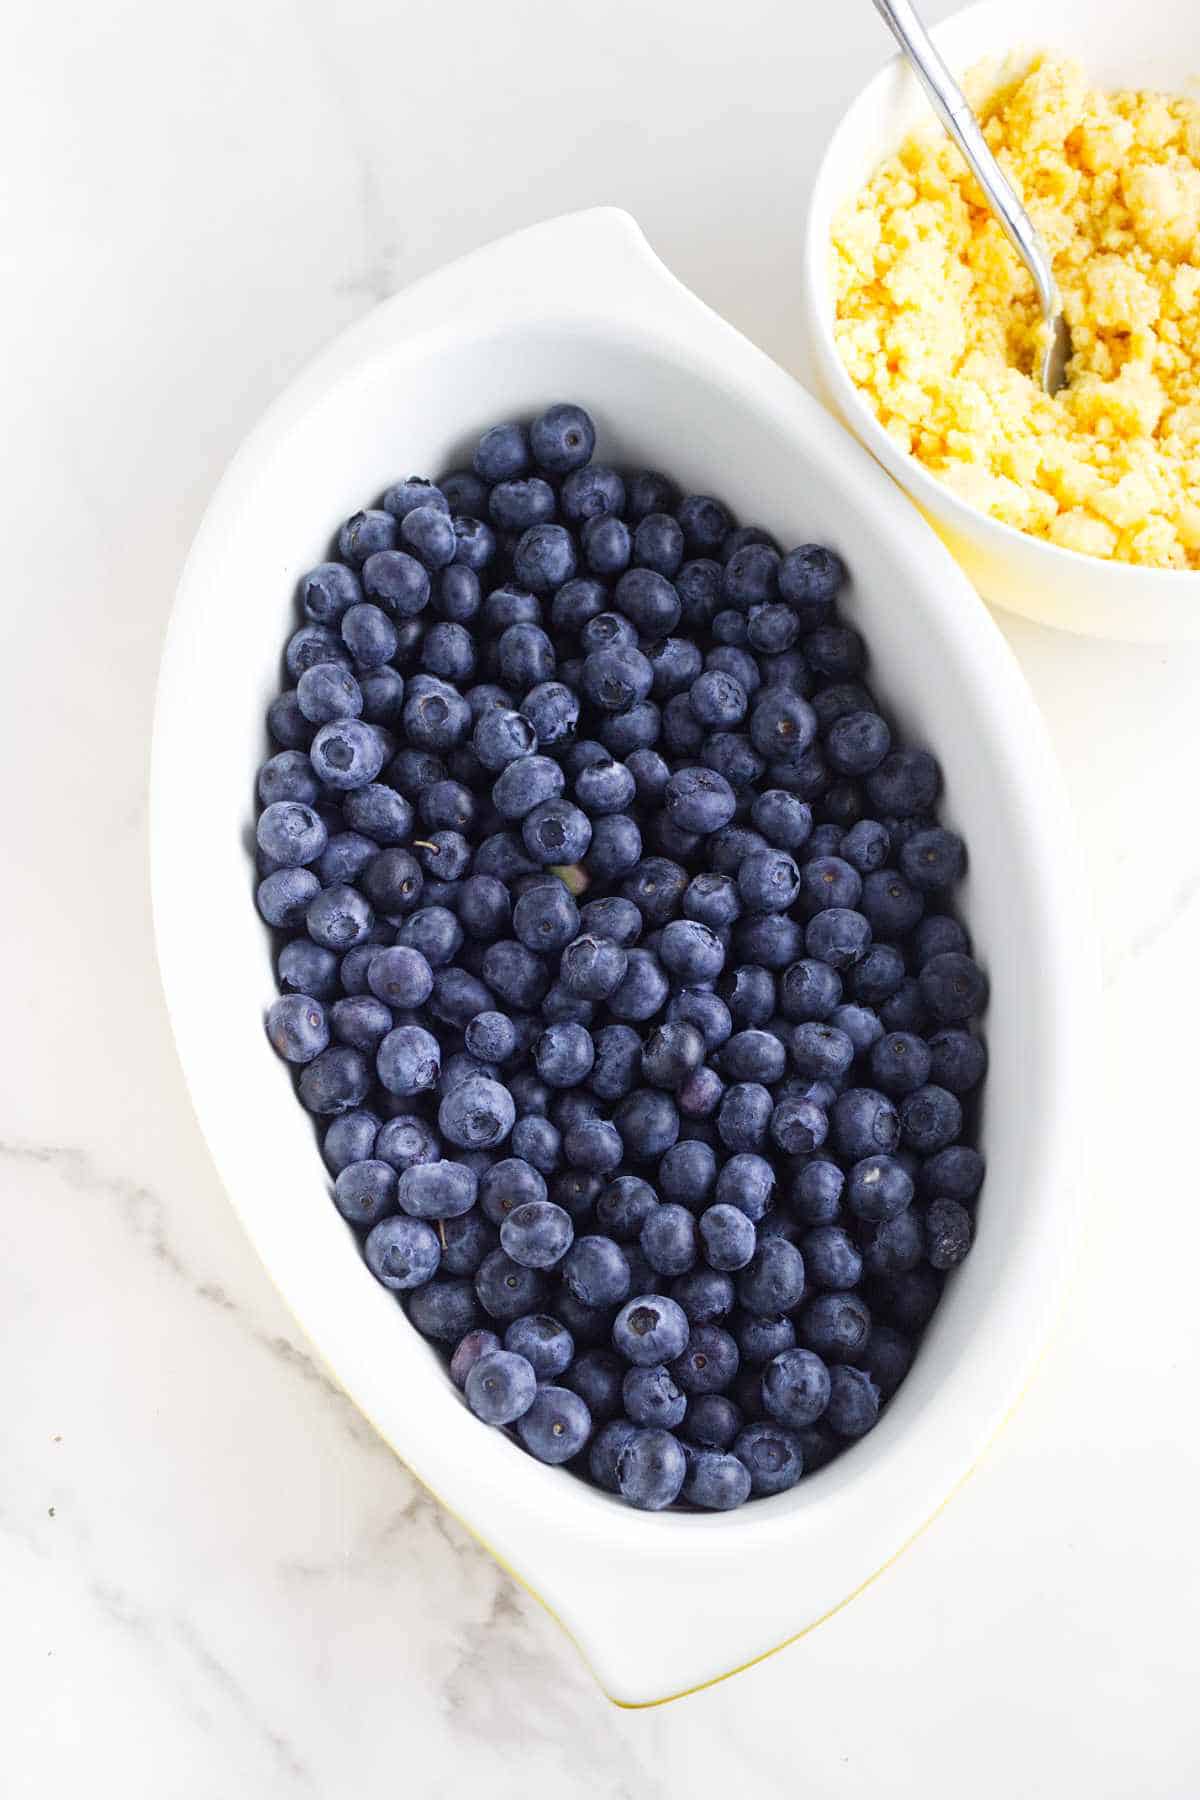 casserole dish filled with blueberries.